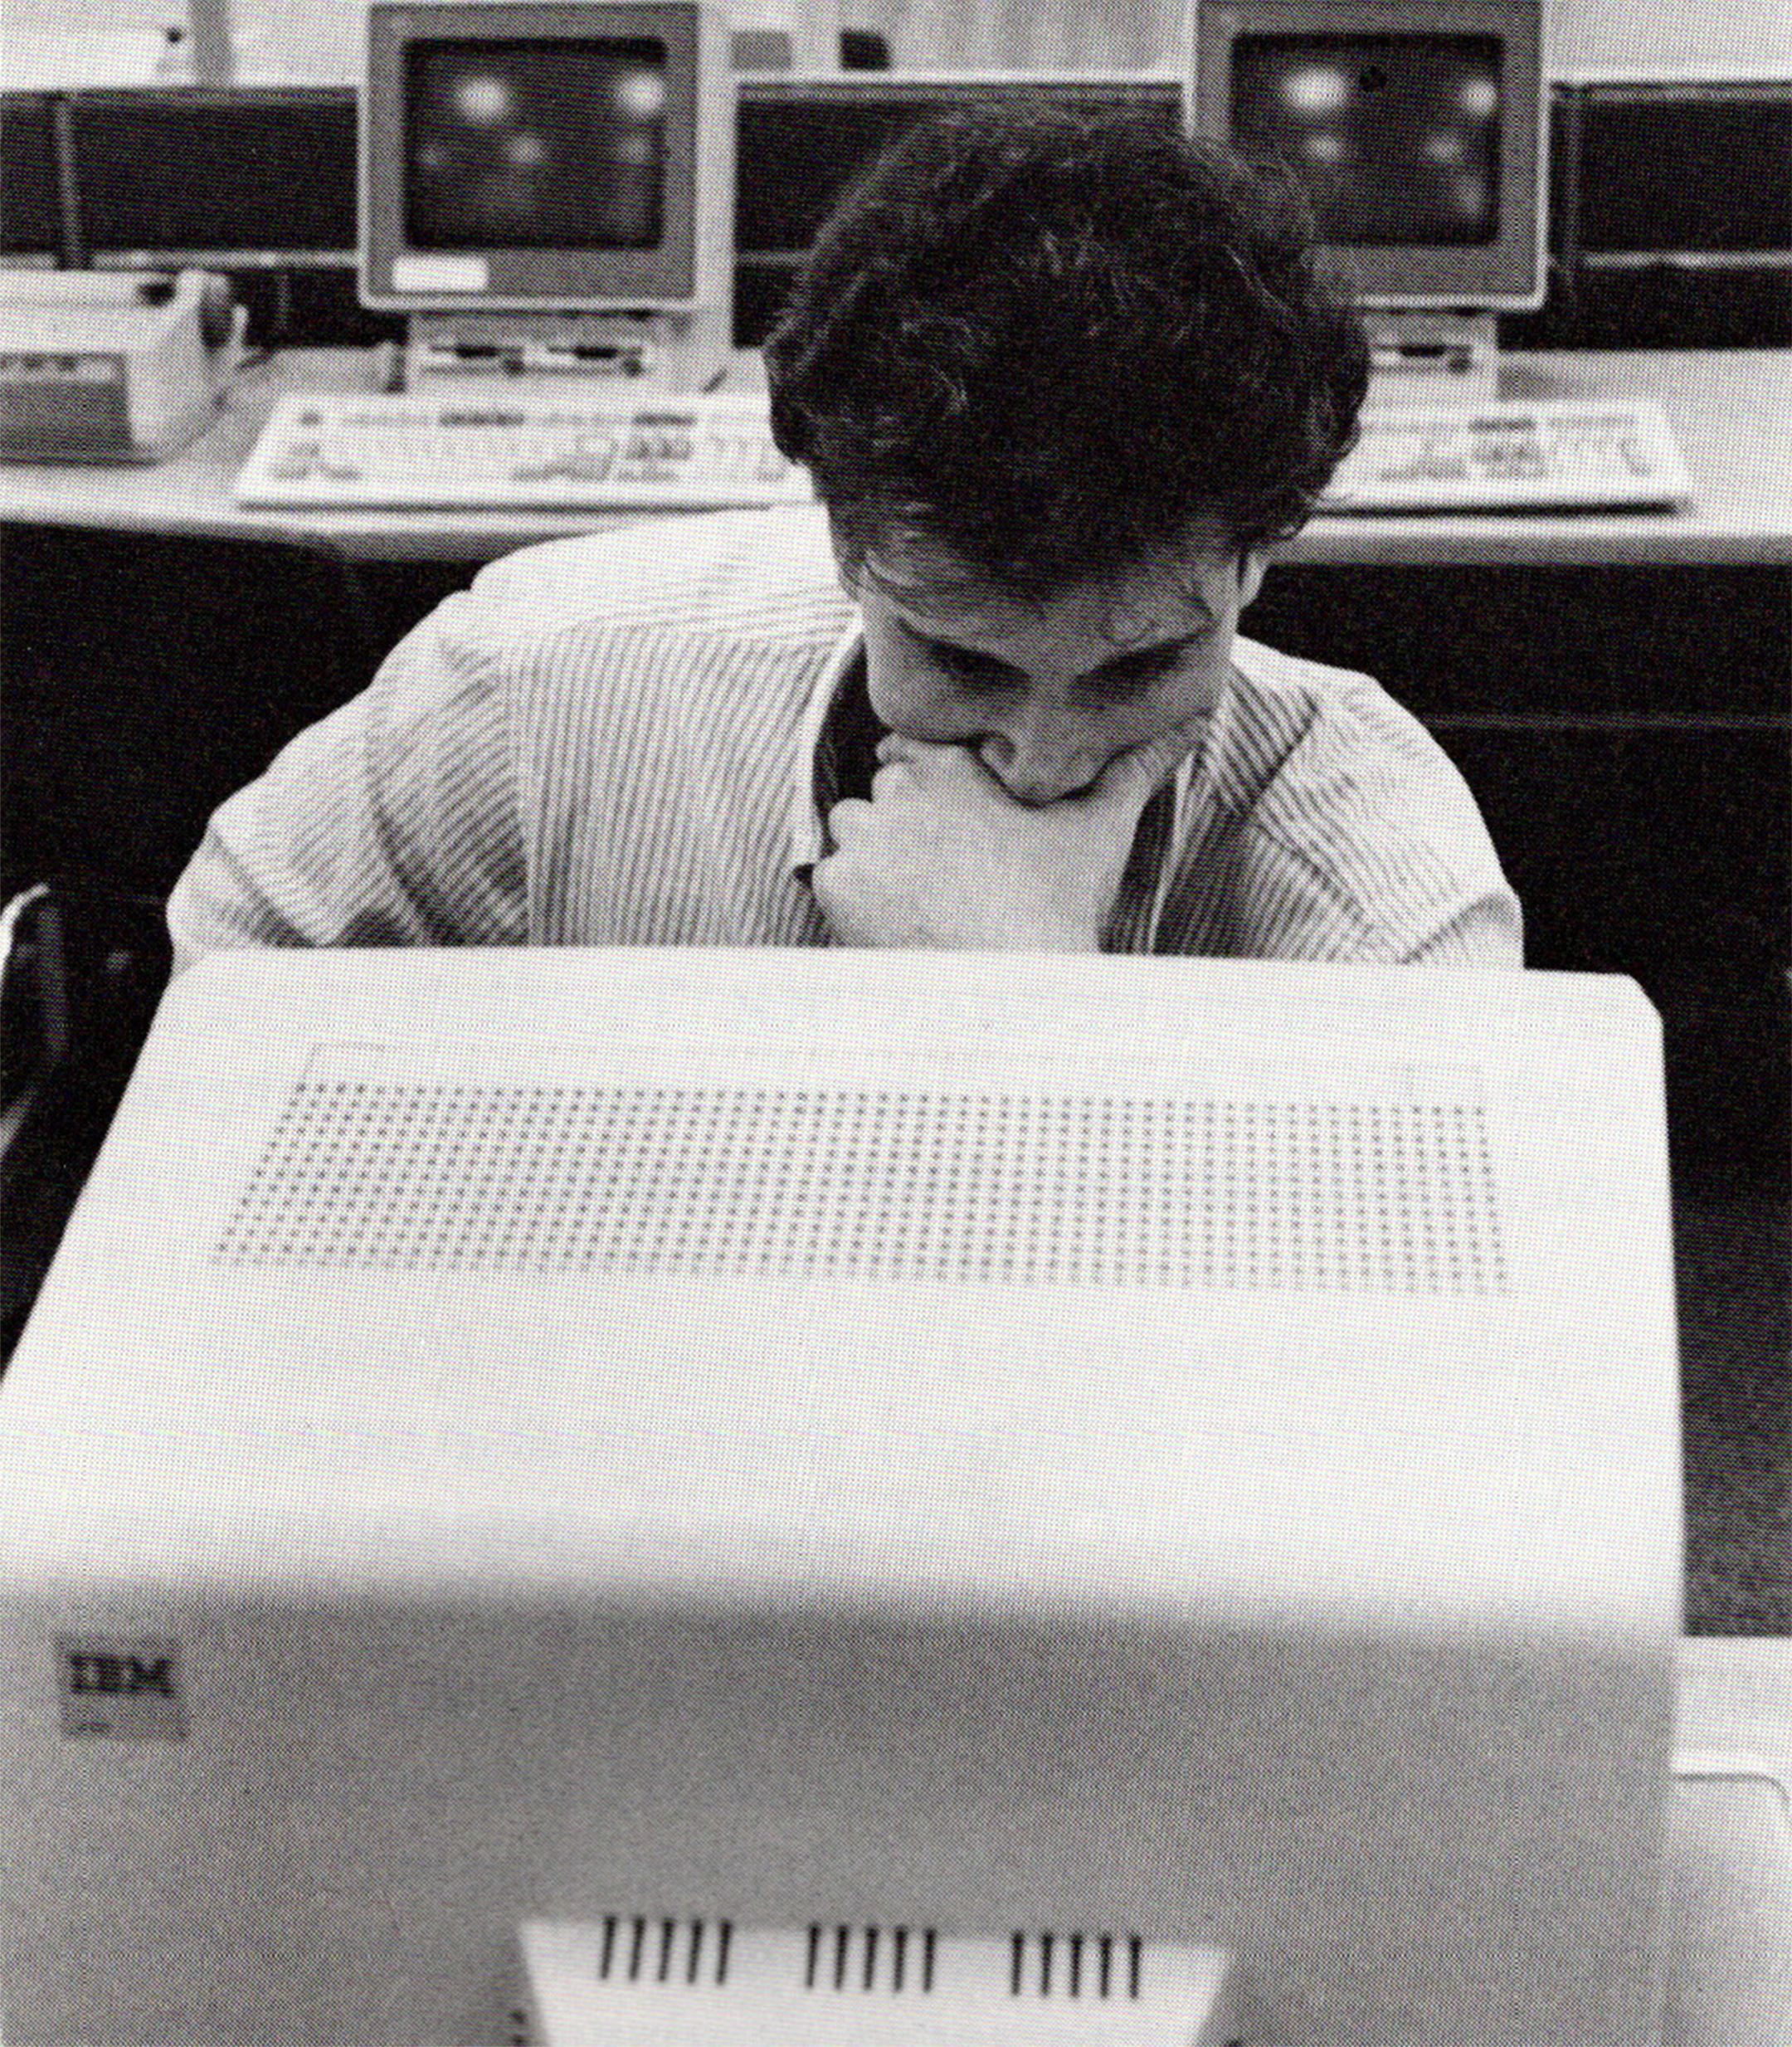 Black and white photo of a male college student with his hand against his mouth and chin, looking pensively at a computer screen